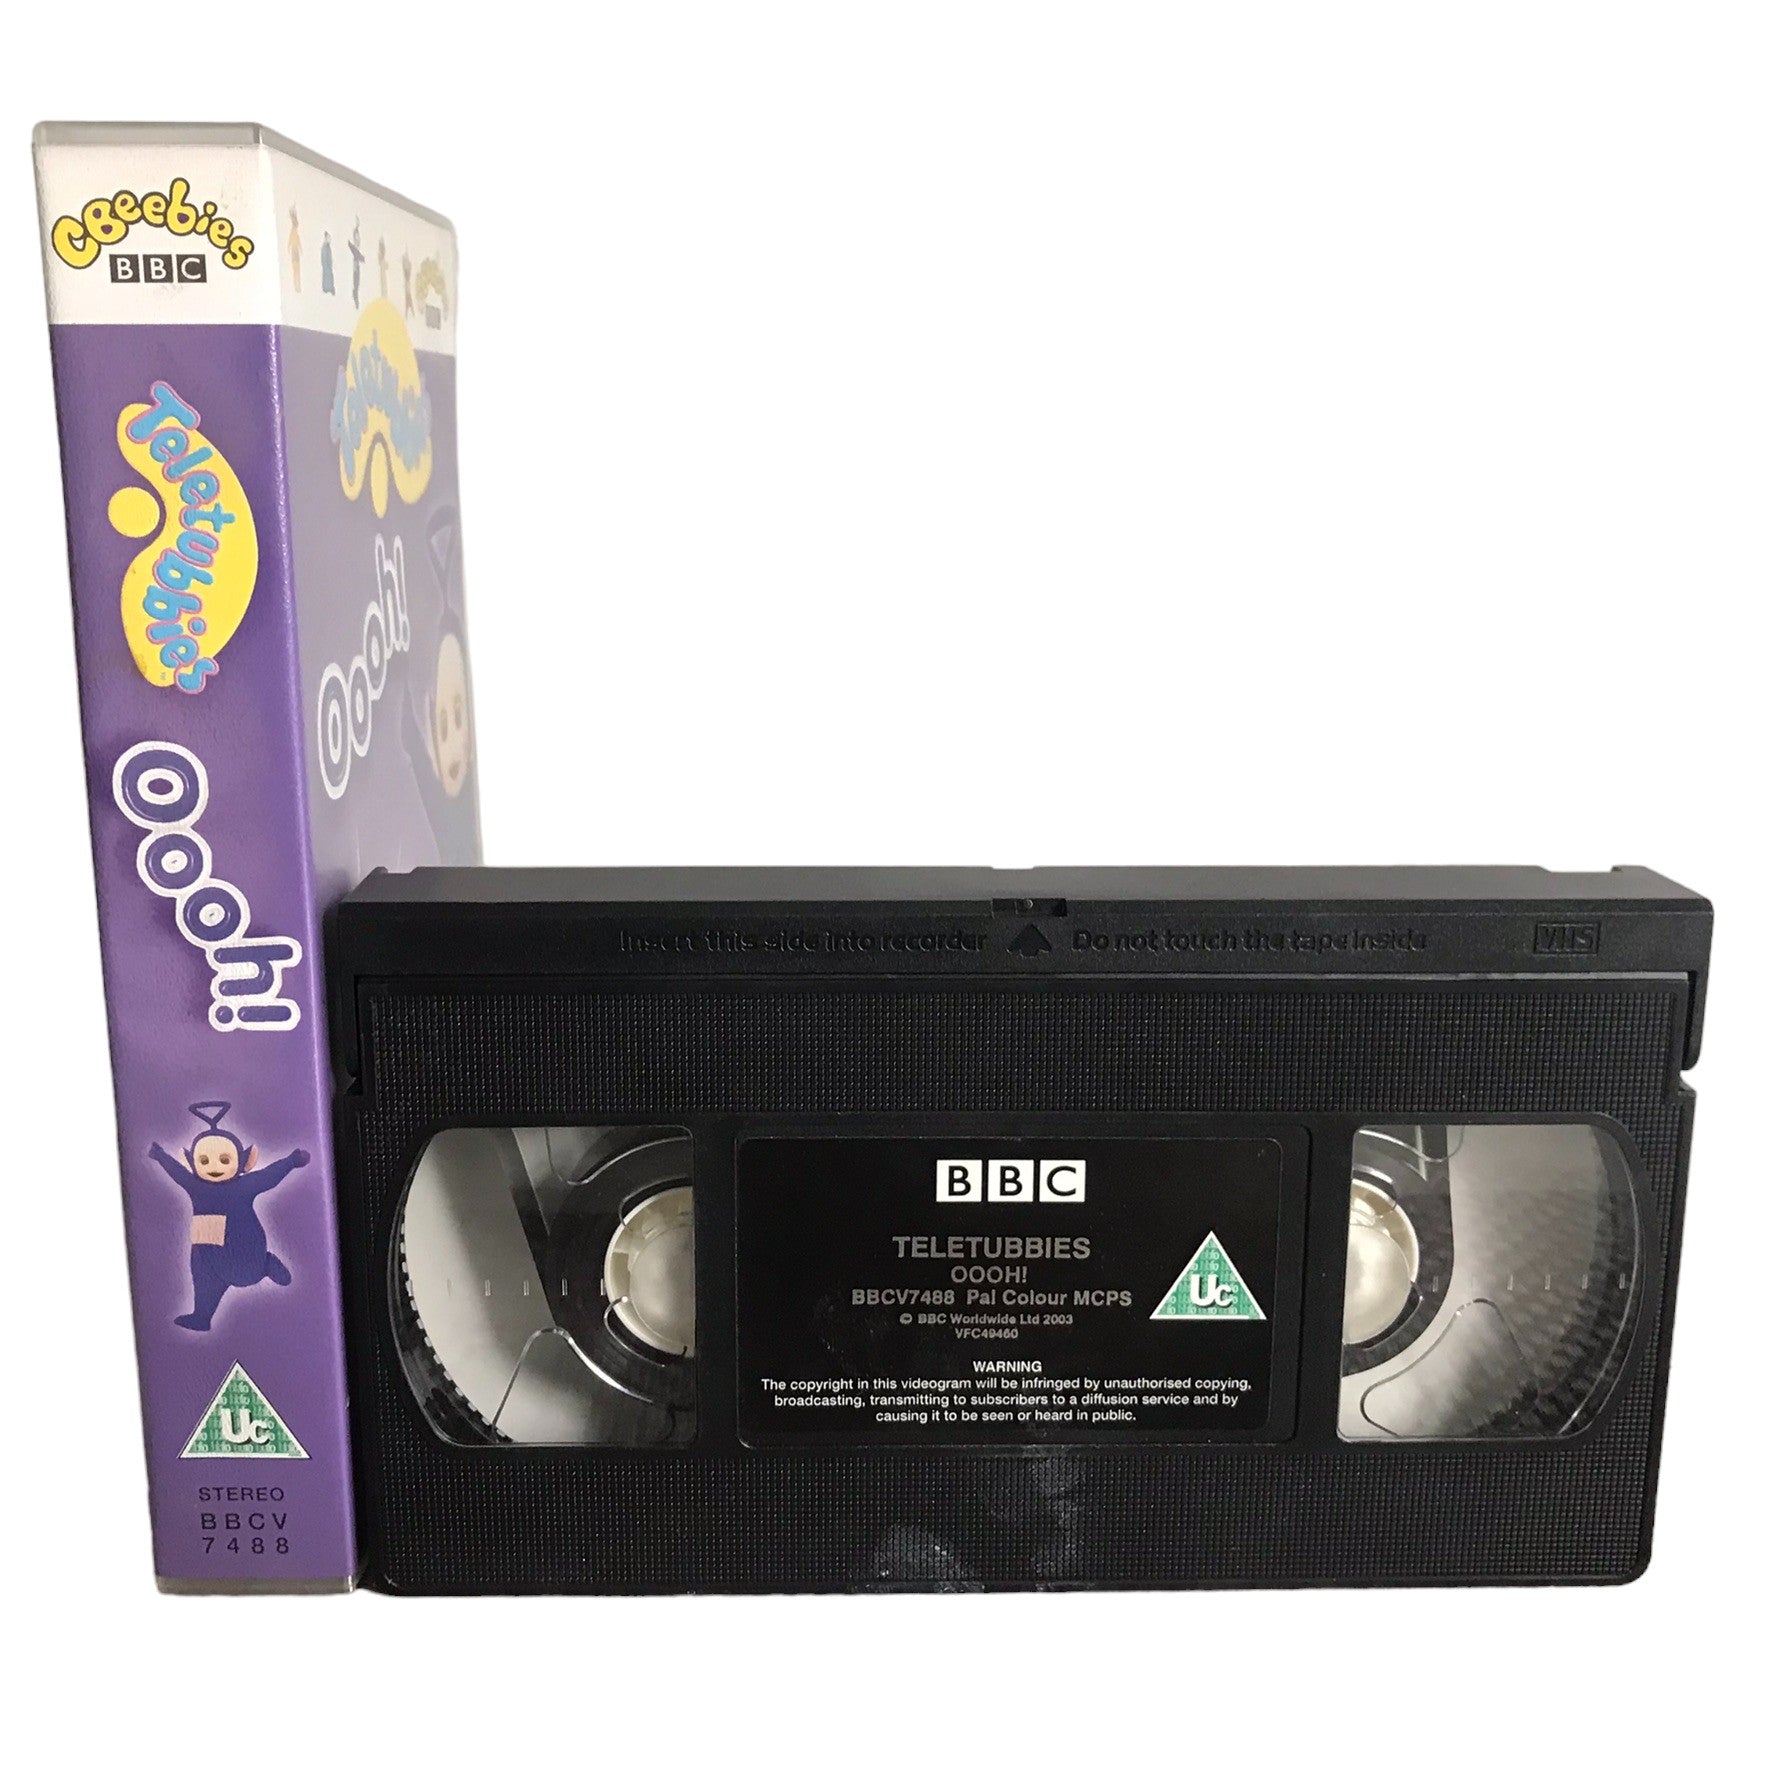 Teletubbies Oooh! - BBC - Childrens - Pal - VHS-